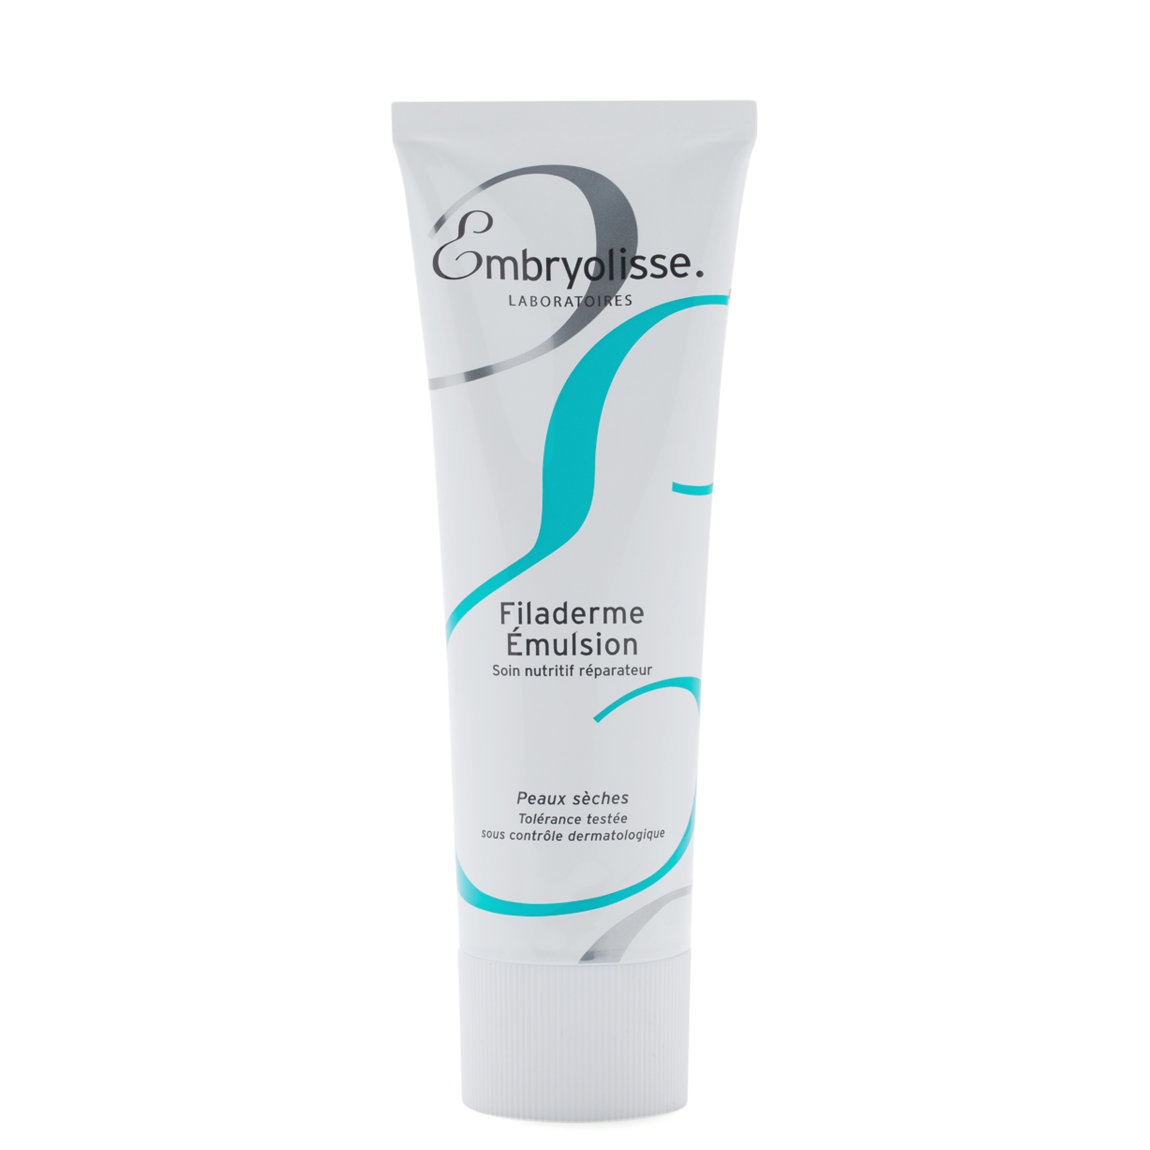 Embryolisse Filaderme Emulsion alternative view 1 - product swatch.